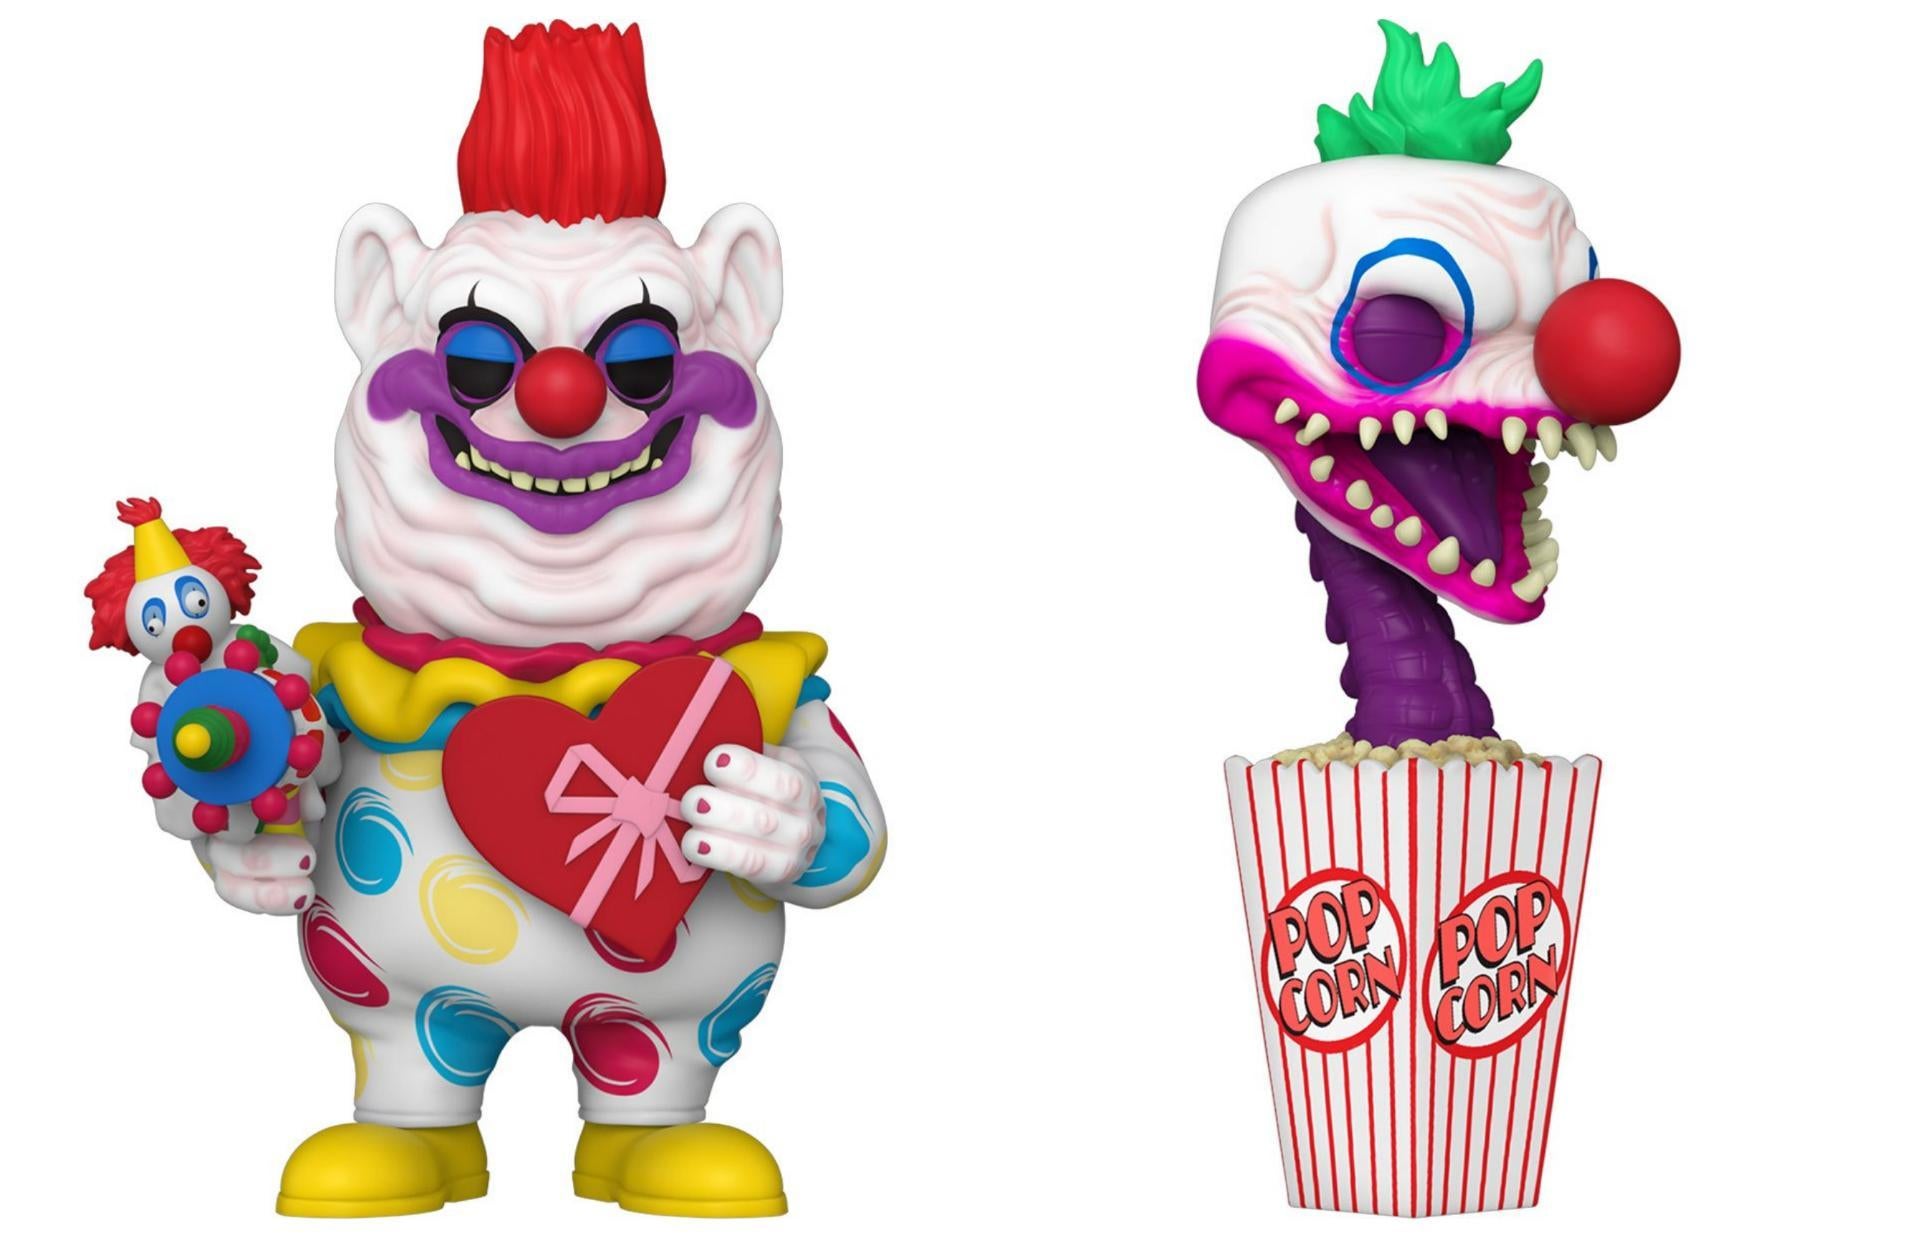 Funko Spirit Halloween Killer Klowns from Outer Space Bibbo with Shorty in  Pizza Box Movie Moment POP! Figure